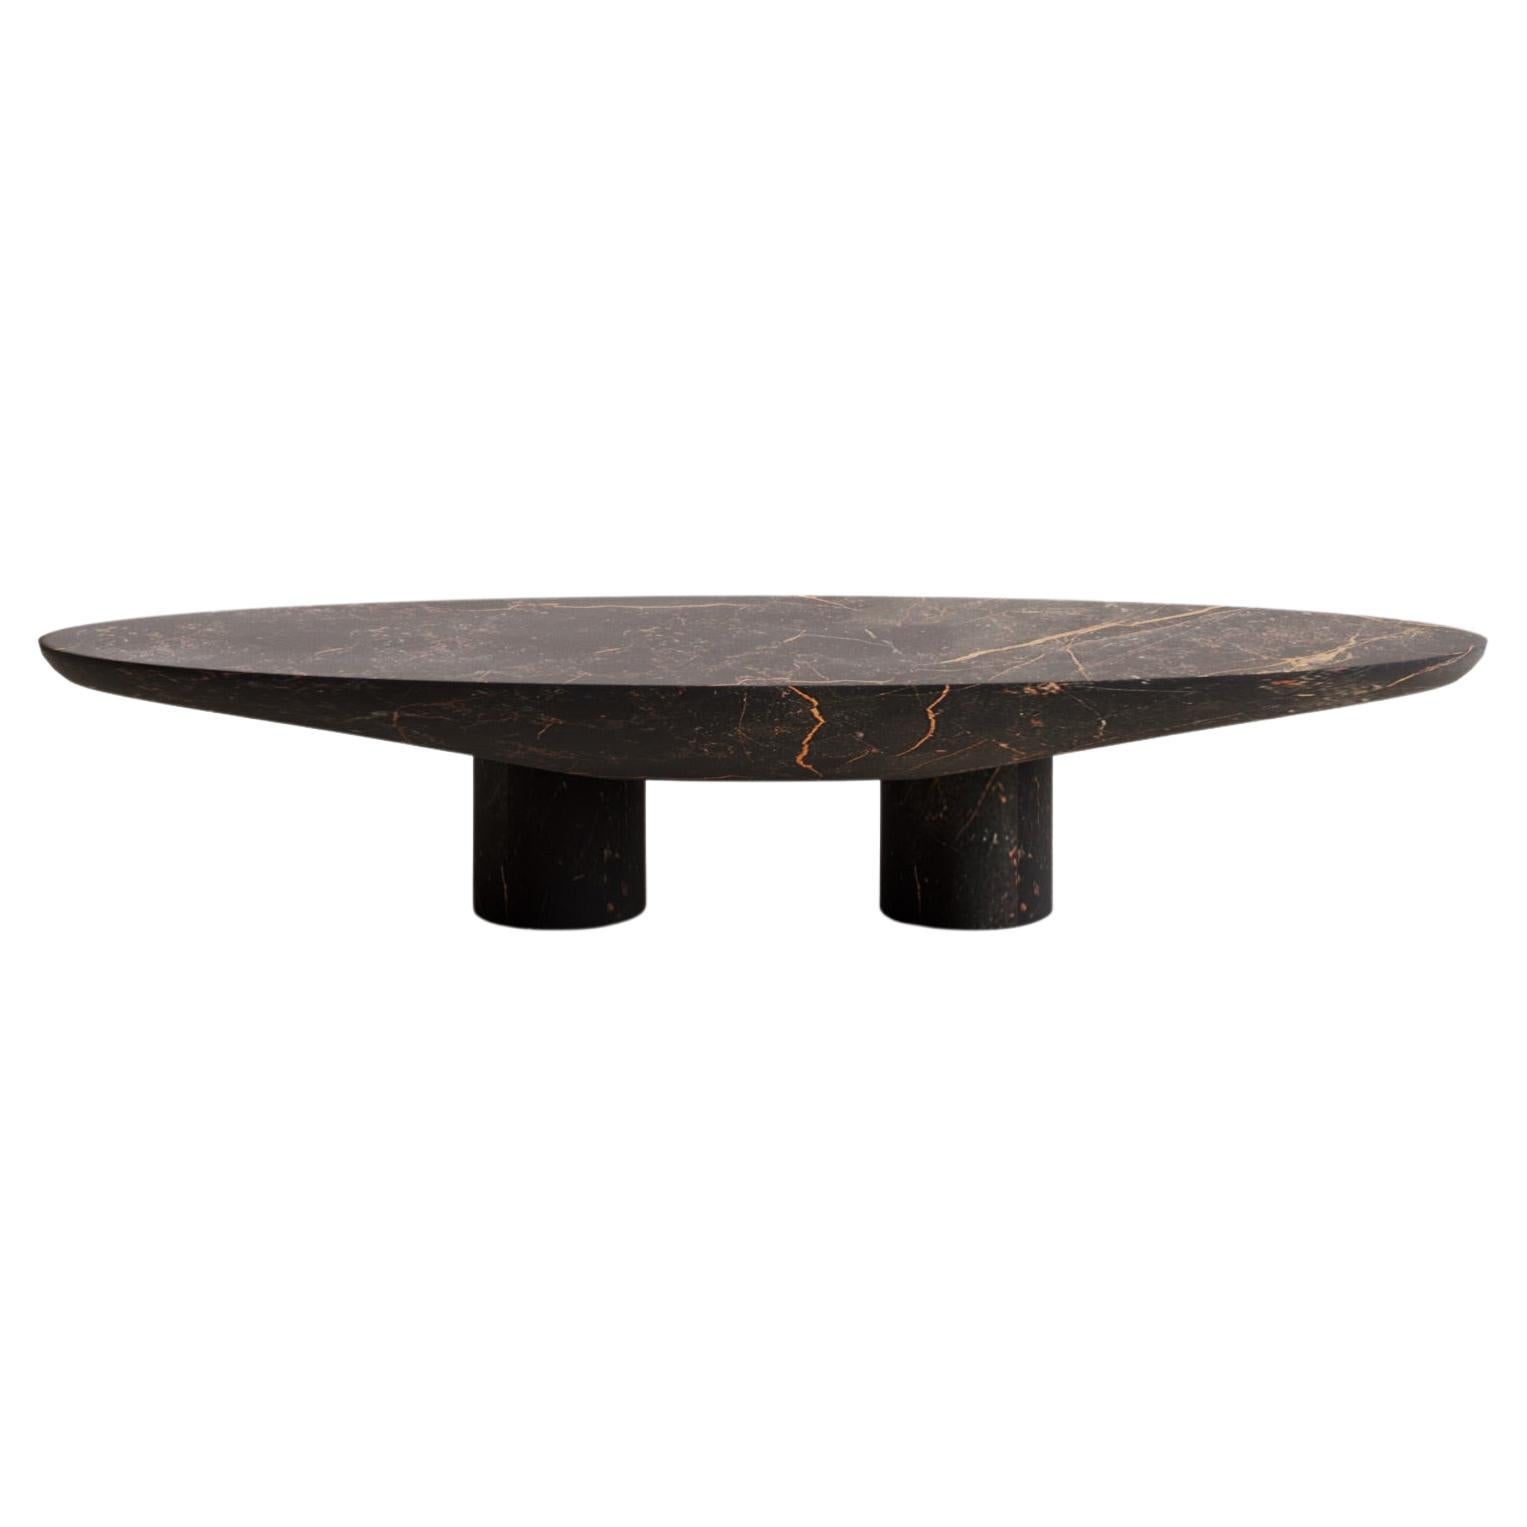 Solid Port Saint Laurent Abraccio Oval Coffee Table 160 by Studio Narra For Sale